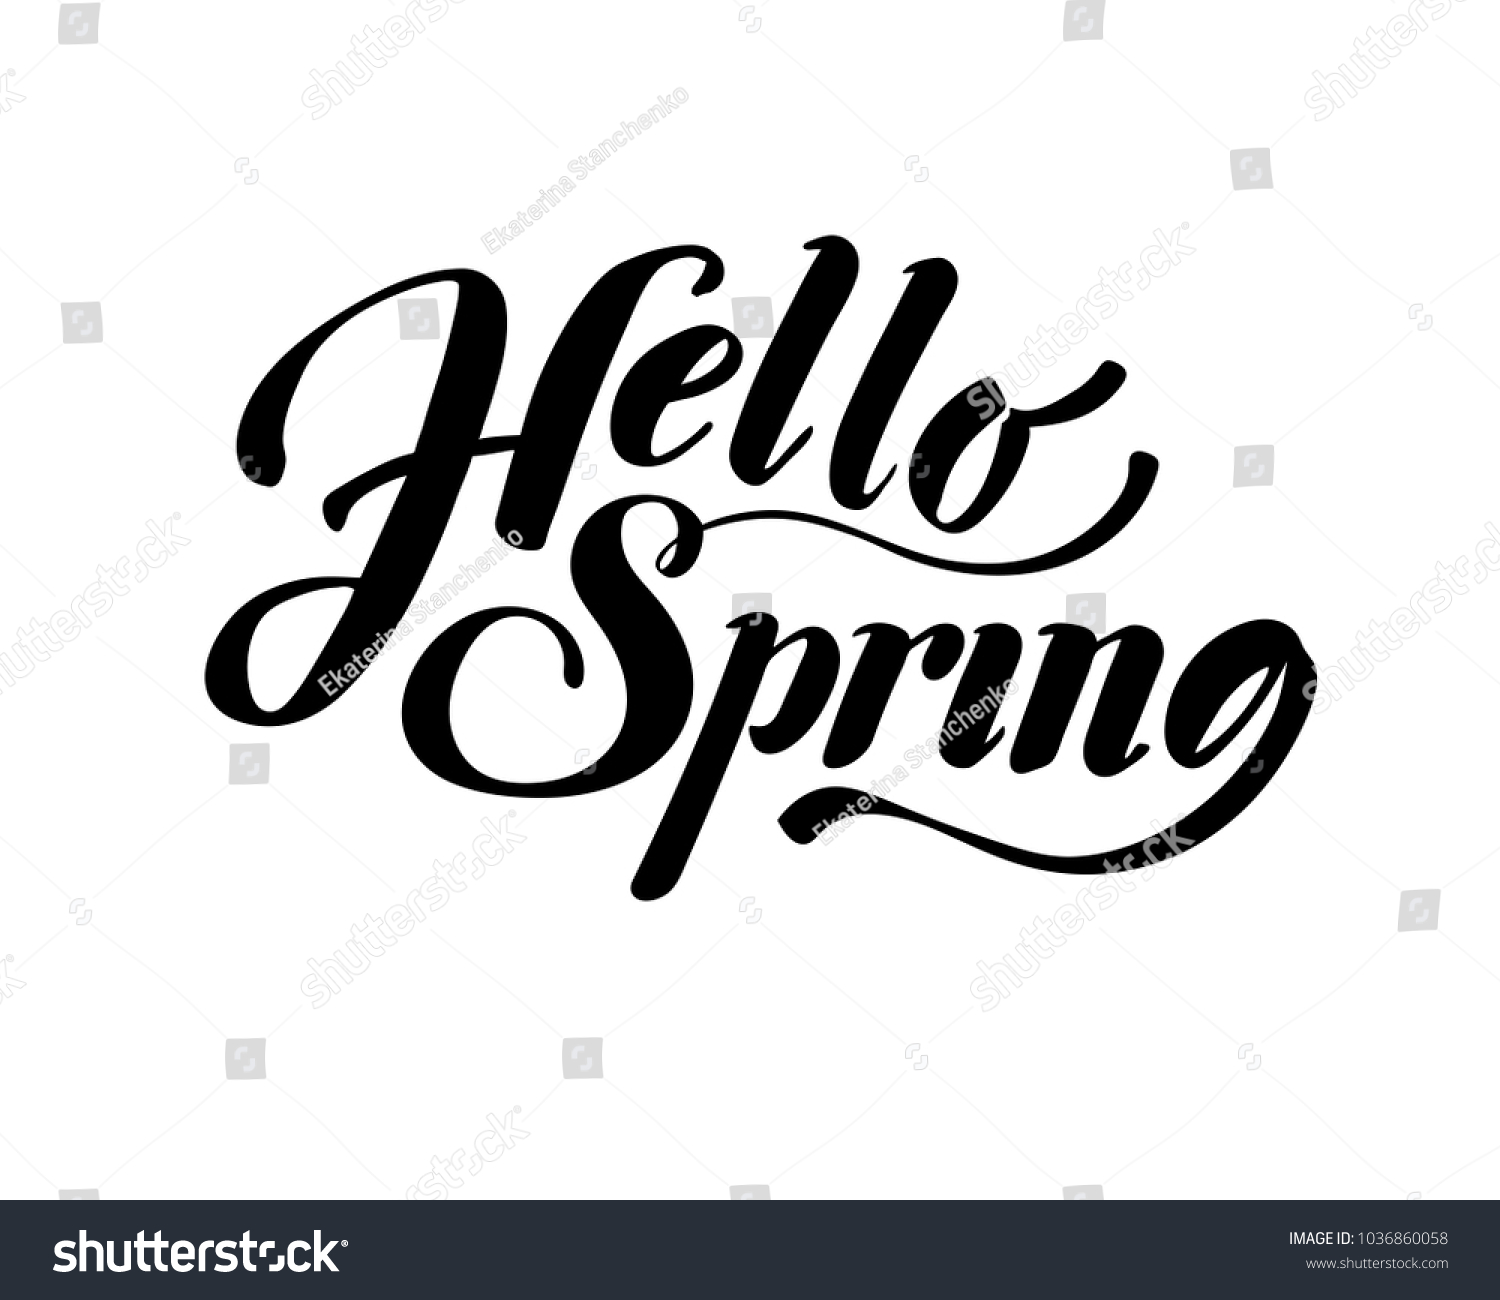 17,991 Hello spring time Images, Stock Photos & Vectors | Shutterstock